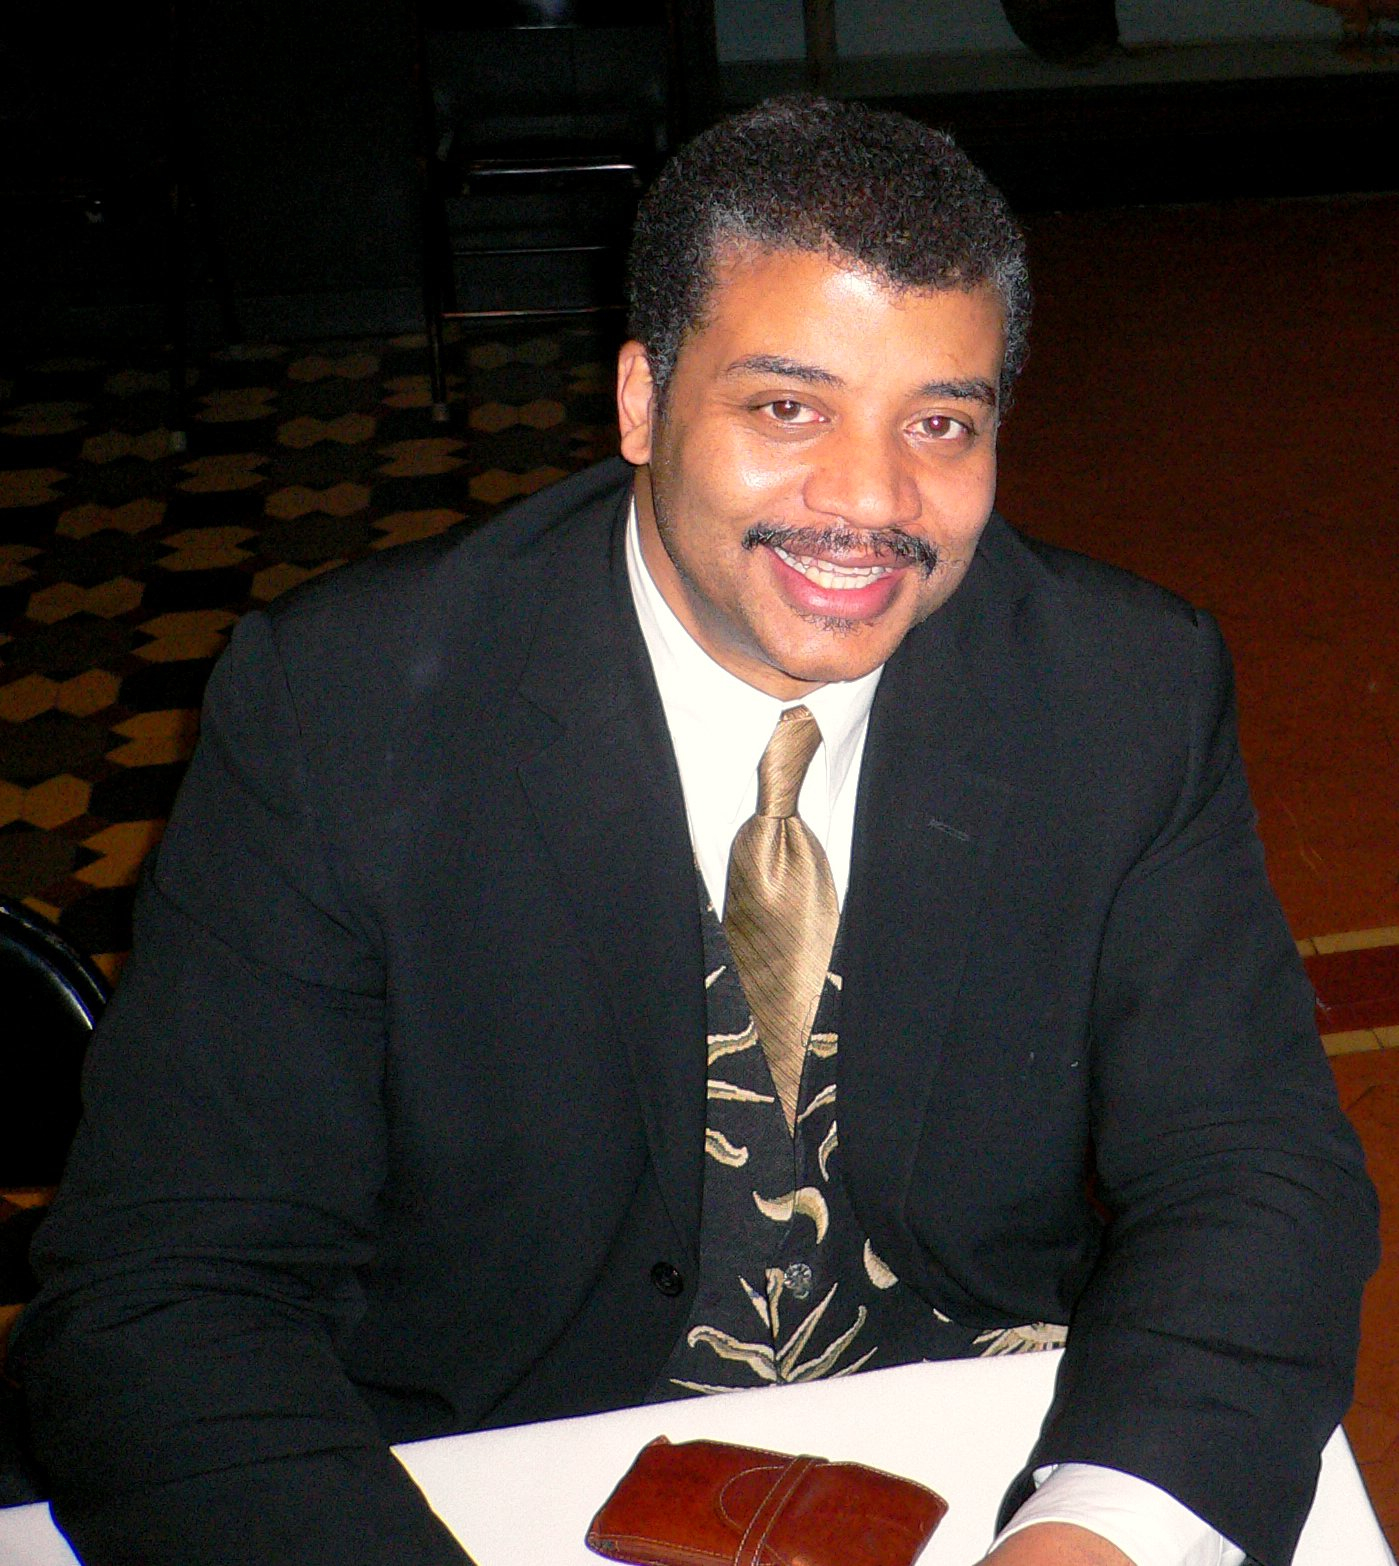 Neil deGrasse Tyson seated signing books after an event at the American Museum of Natural History.